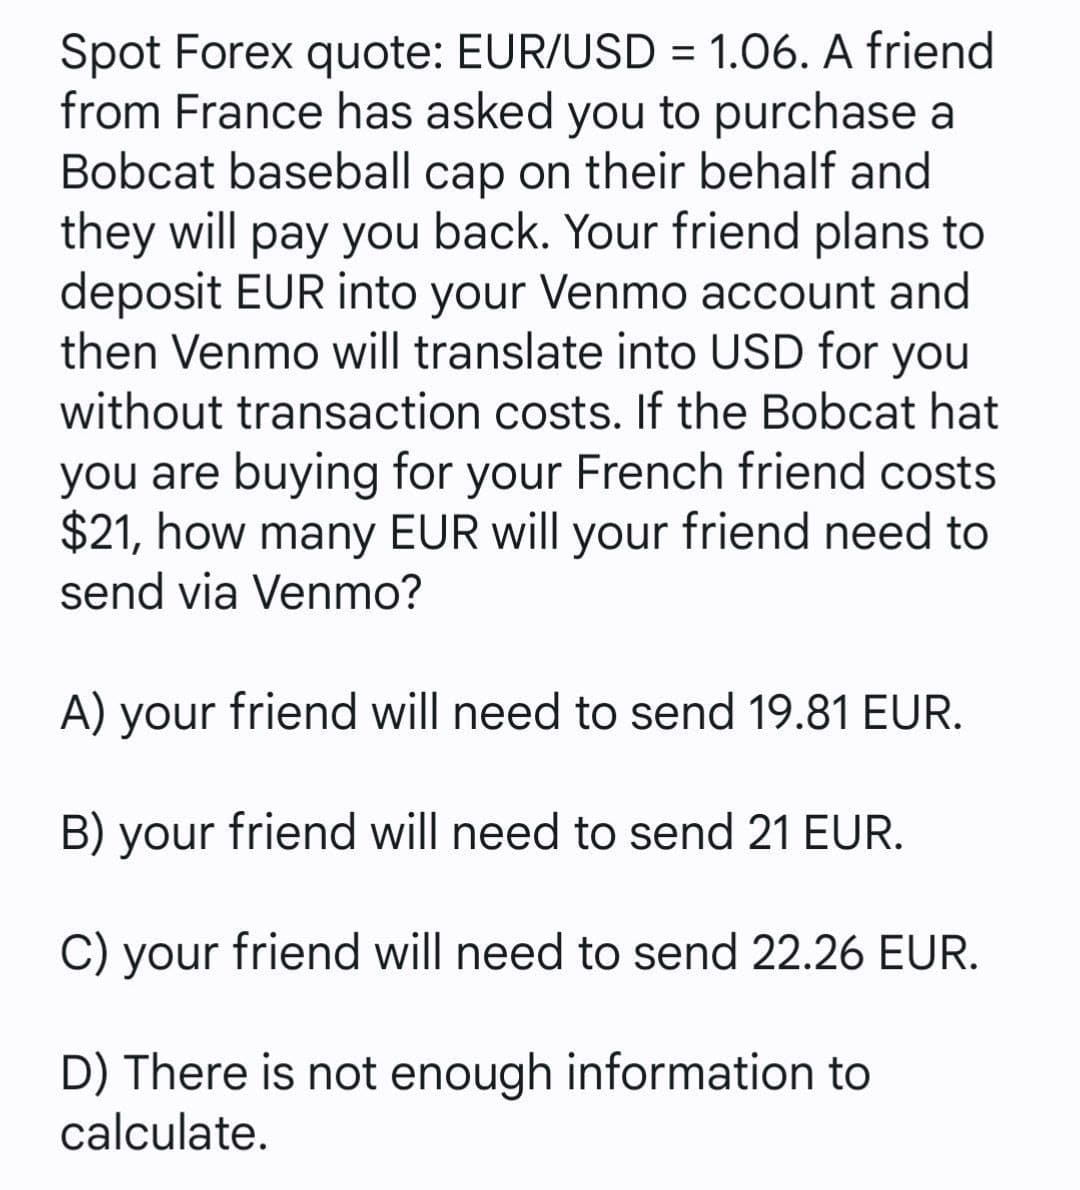 Spot Forex quote: EUR/USD = 1.06. A friend
from France has asked you to purchase a
Bobcat baseball cap on their behalf and
they will pay you back. Your friend plans to
deposit EUR into your Venmo account and
then Venmo will translate into USD for you
without transaction costs. If the Bobcat hat
you are buying for your French friend costs
$21, how many EUR will your friend need to
send via Venmo?
%3D
A) your friend will need to send 19.81 EUR.
B) your friend will need to send 21 EUR.
C) your friend will need to send 22.26 EUR.
D) There is not enough information to
calculate.
